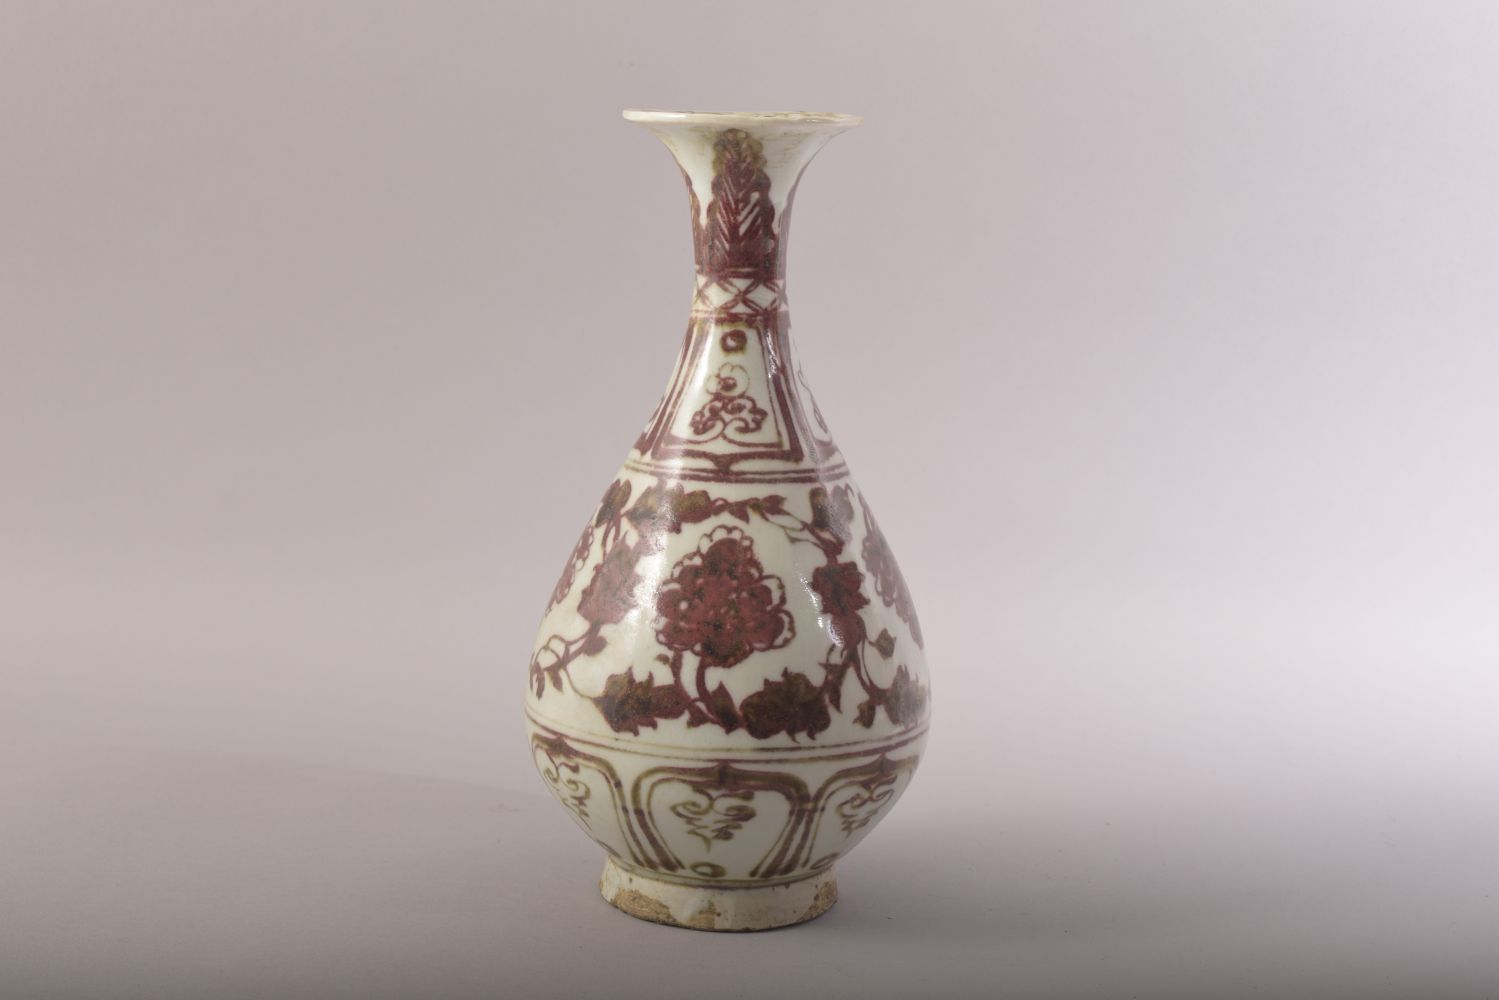 A CHINESE IRON RED AND WHITE GLAZED POTTERY VASE, decorated with floral motifs, 24.5cm high. - Image 3 of 6